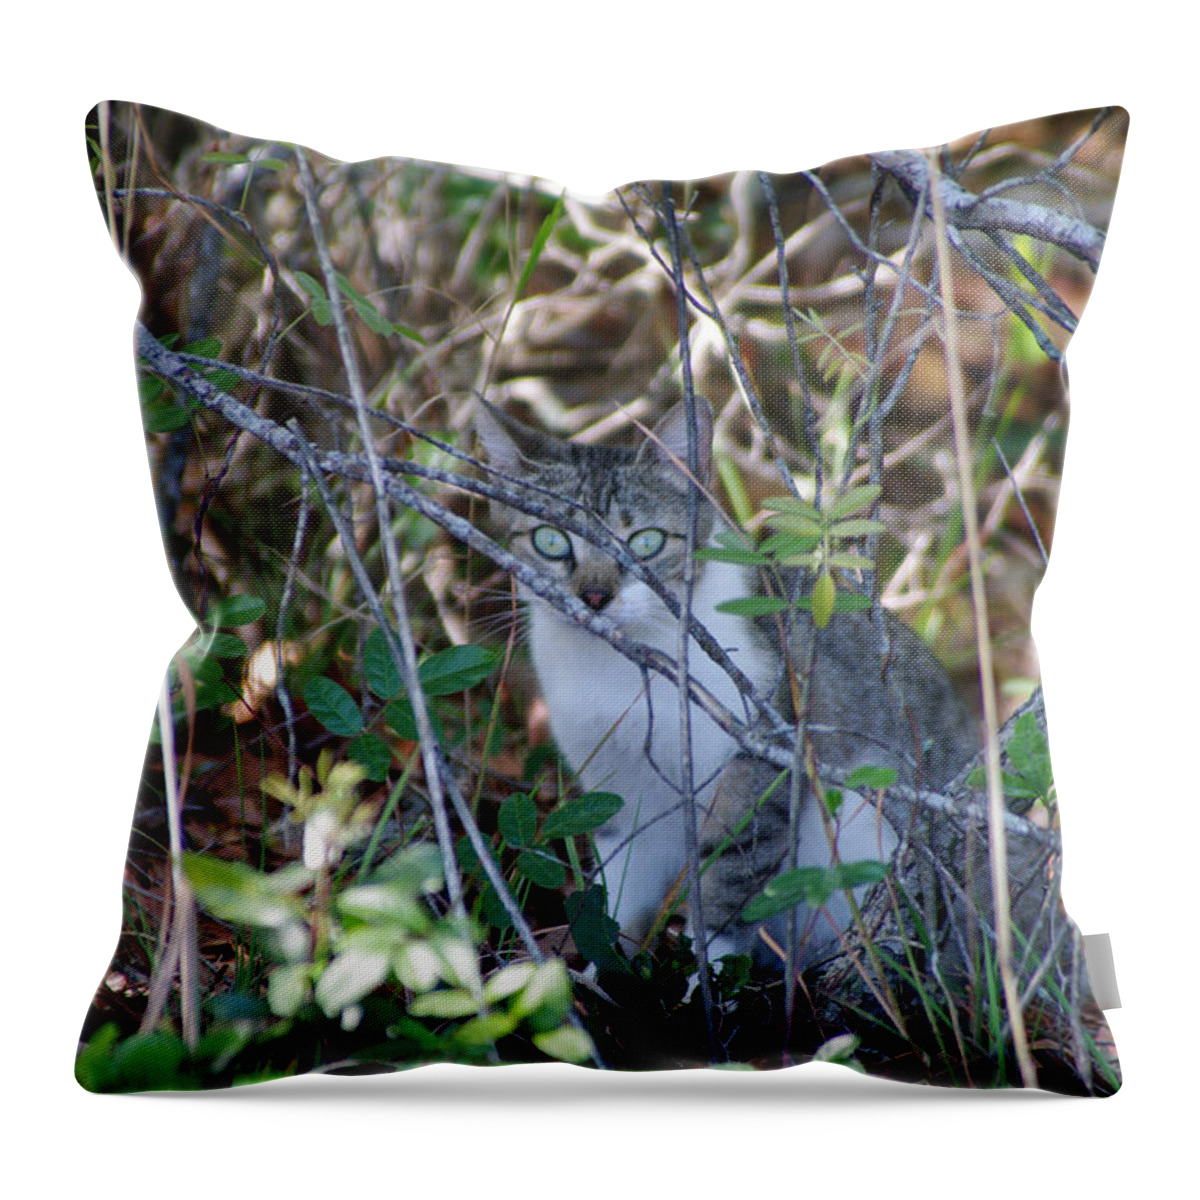 Cat Throw Pillow featuring the photograph Camouflage Cat by Greg Graham